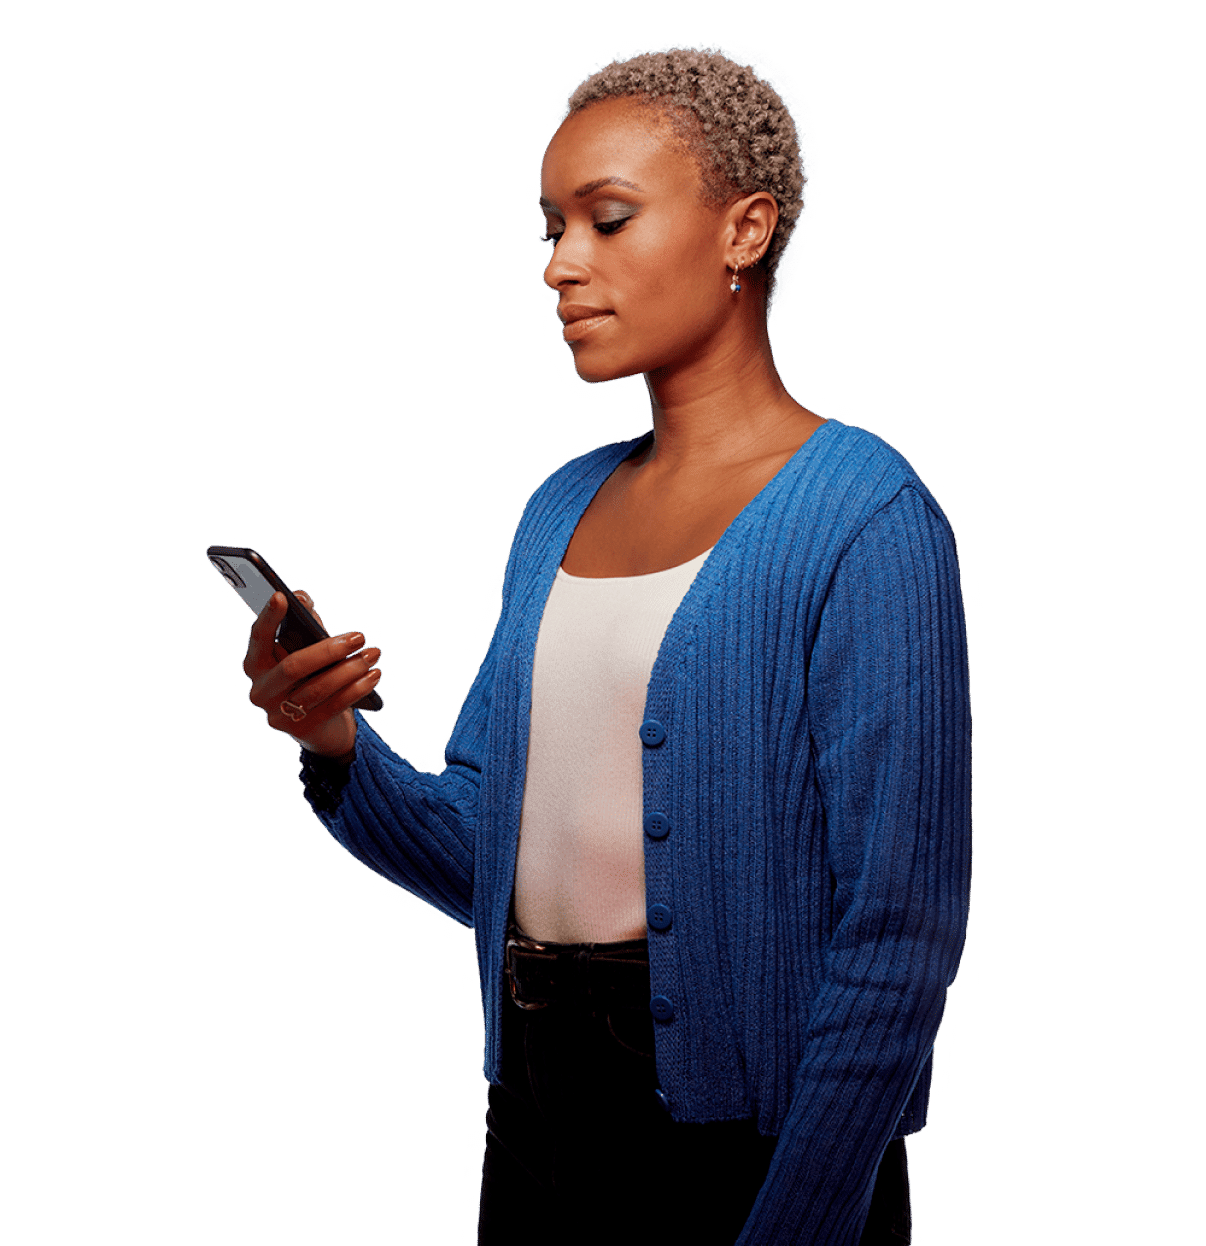 footer image of a woman looking at a phone